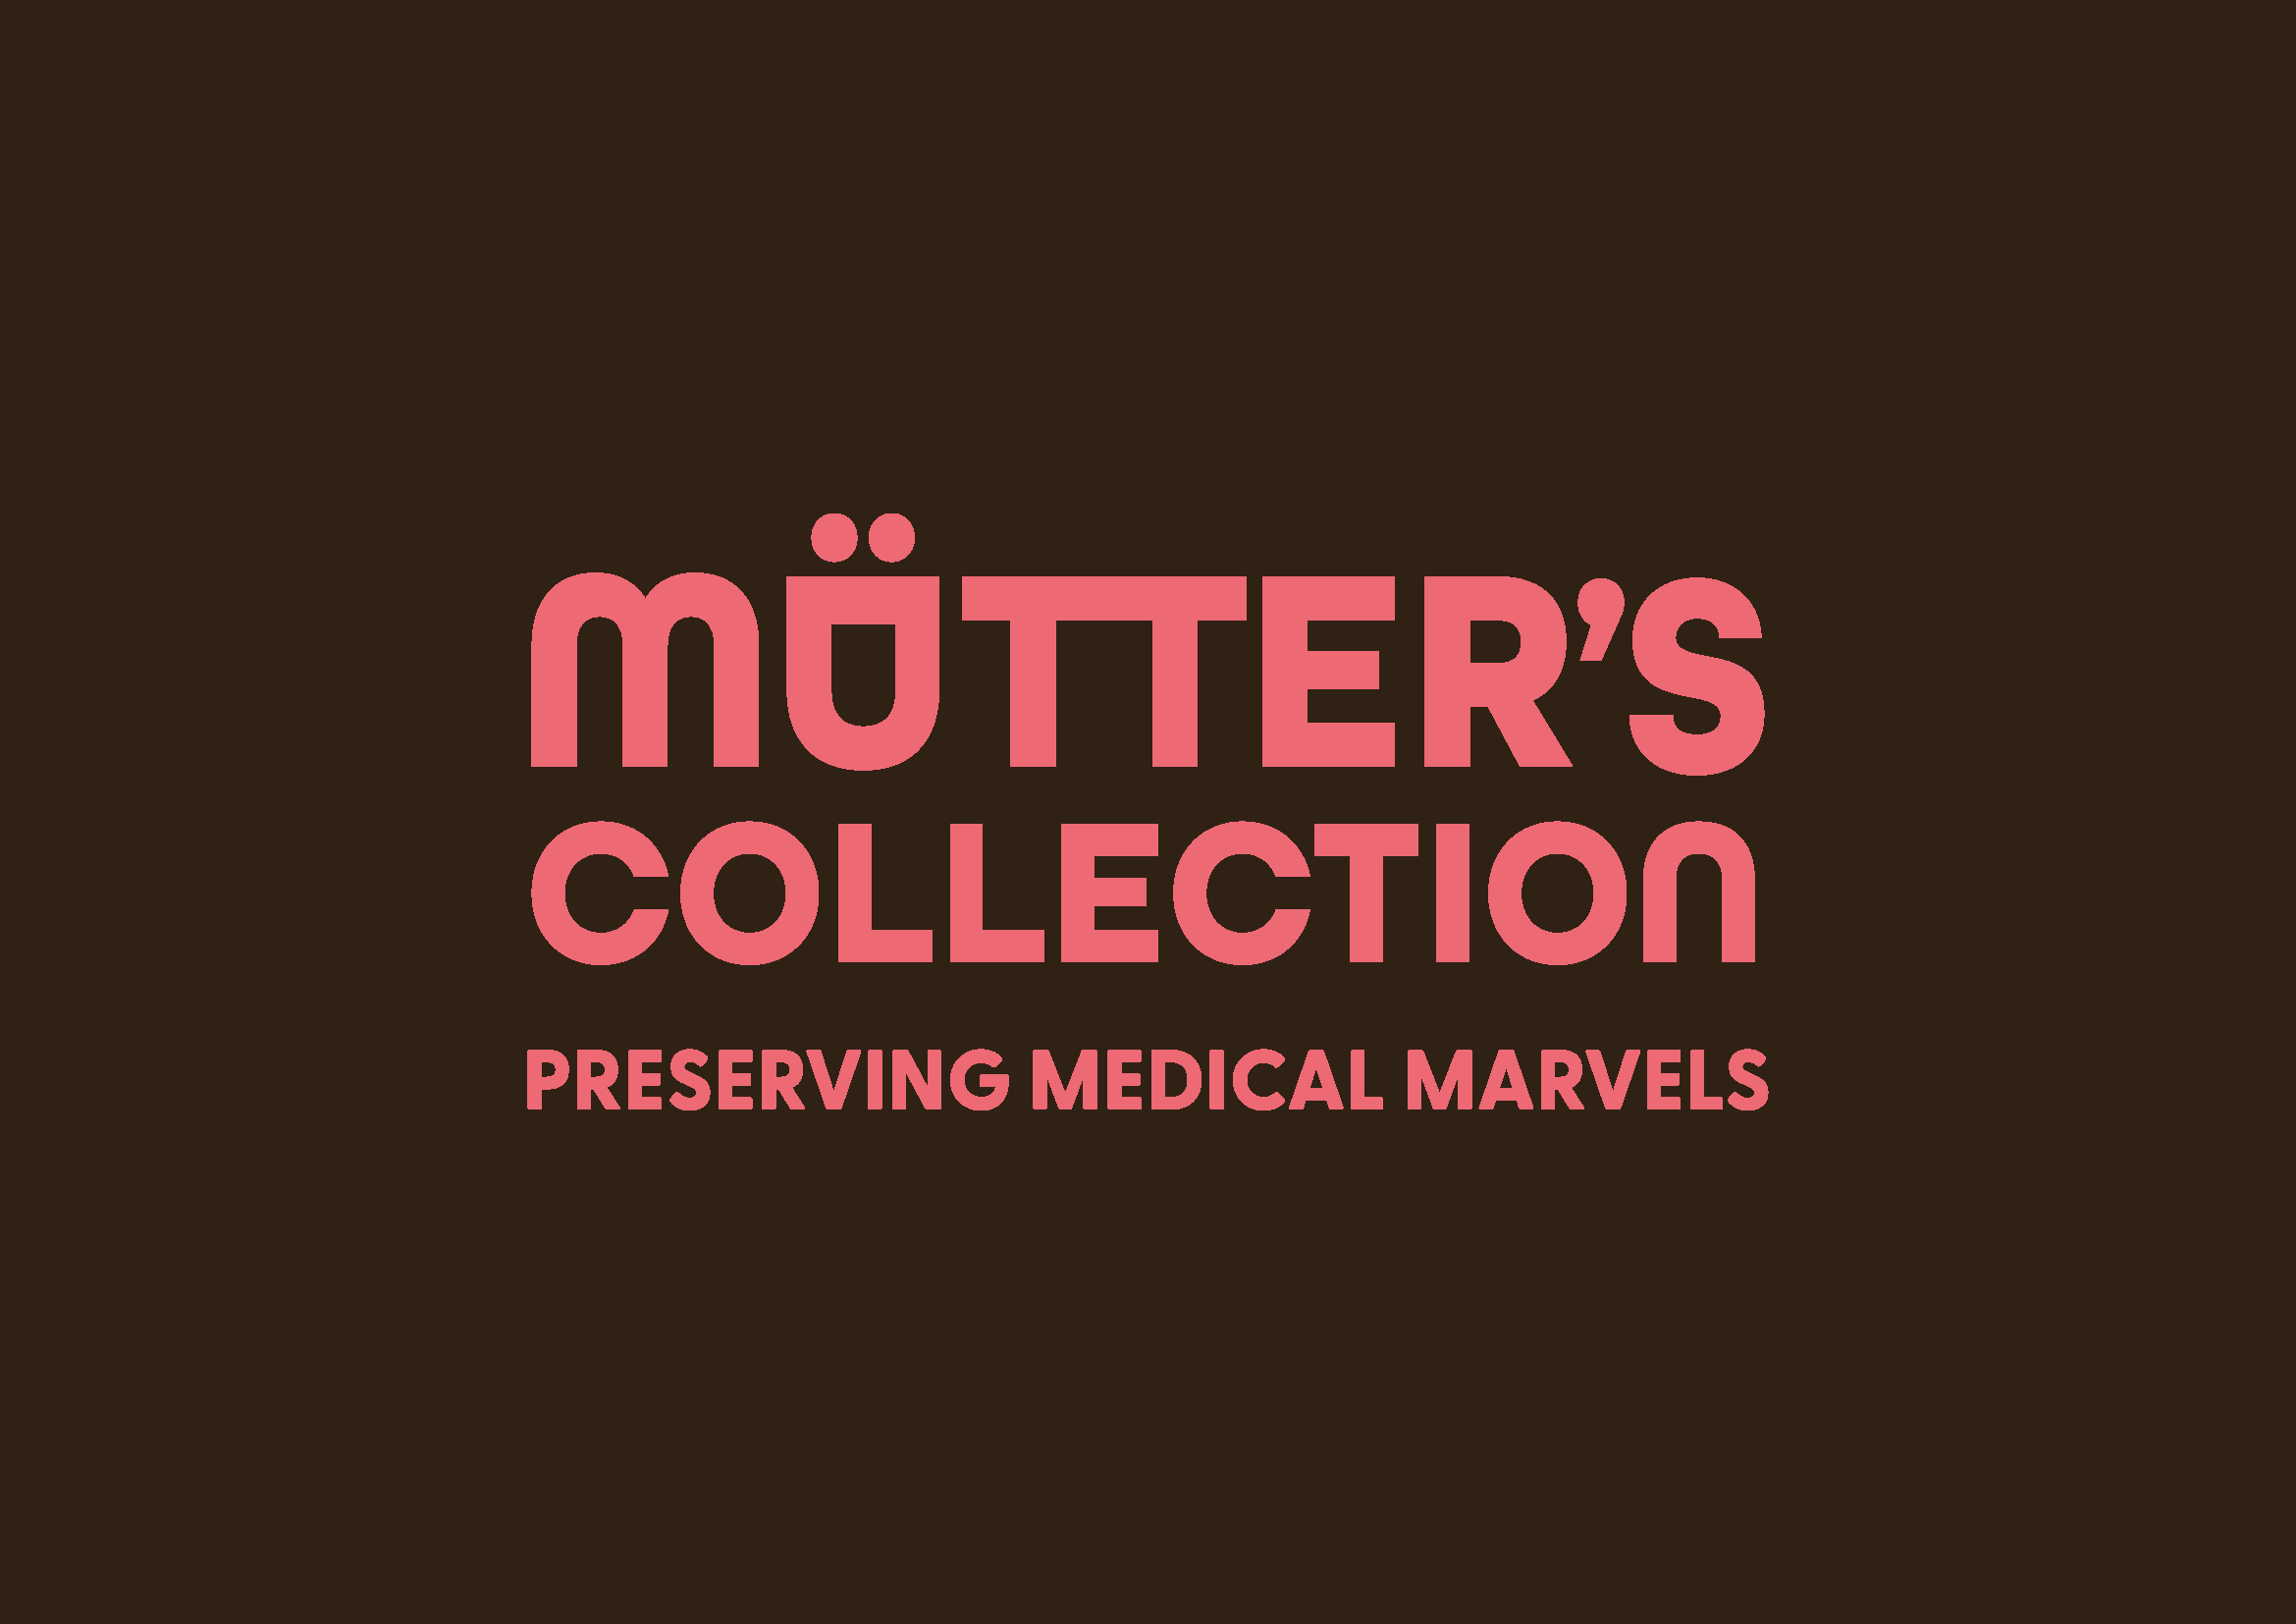 Mütter's Collection